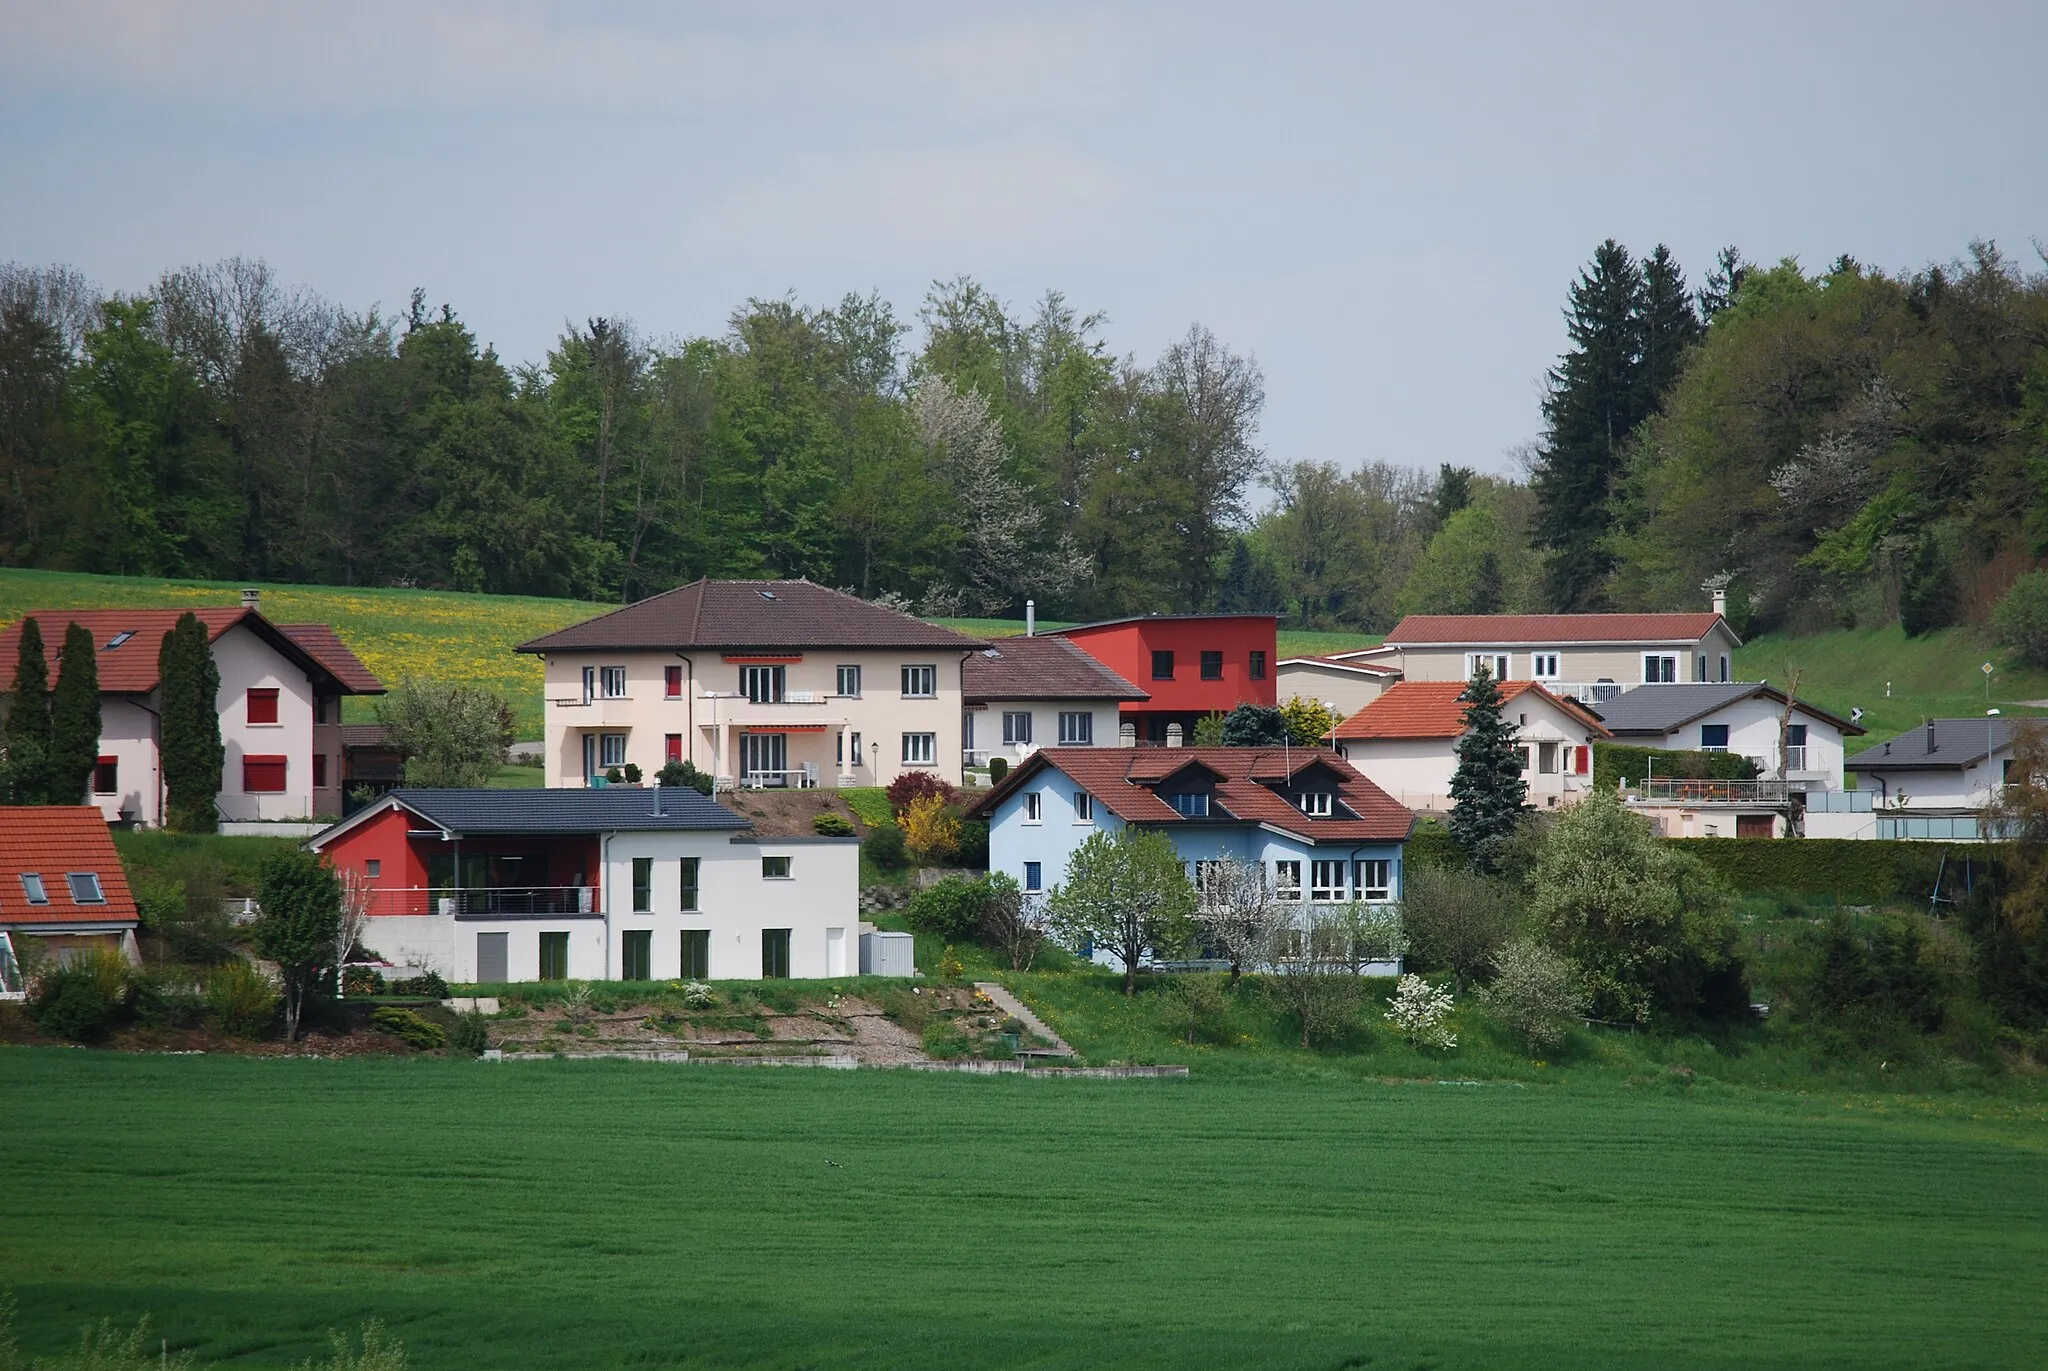 Photo showing: Farvagny-Le Petit, municipality Farvagny, canton of Fribourg, Switzerland